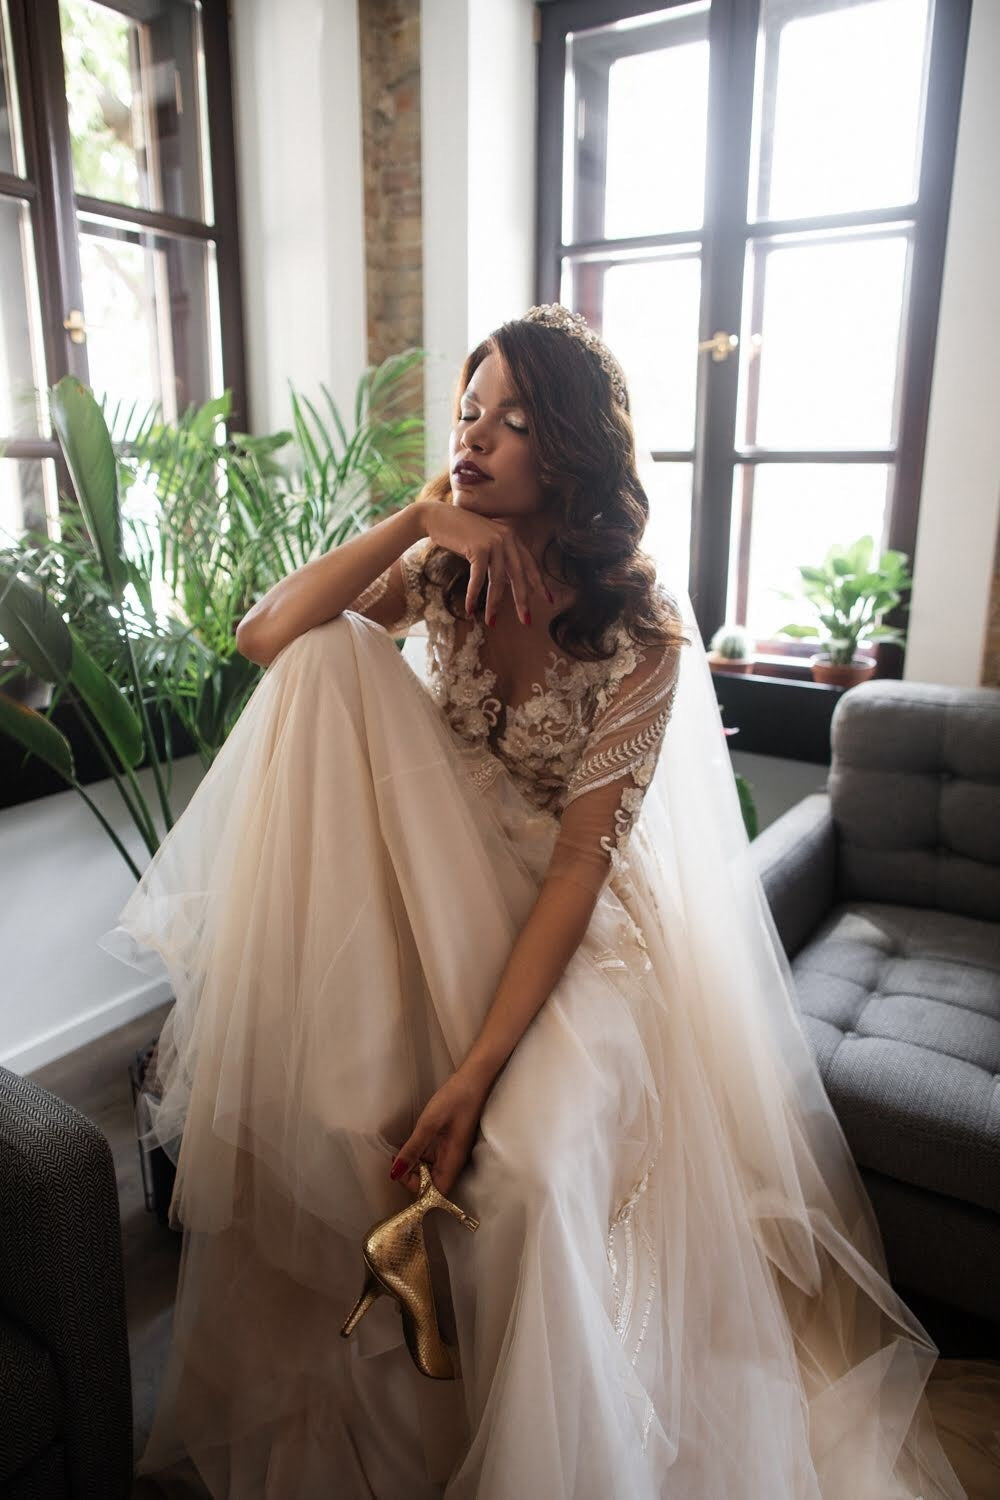 From Dream to Dress: Creating Your Own Bespoke Wedding Dress